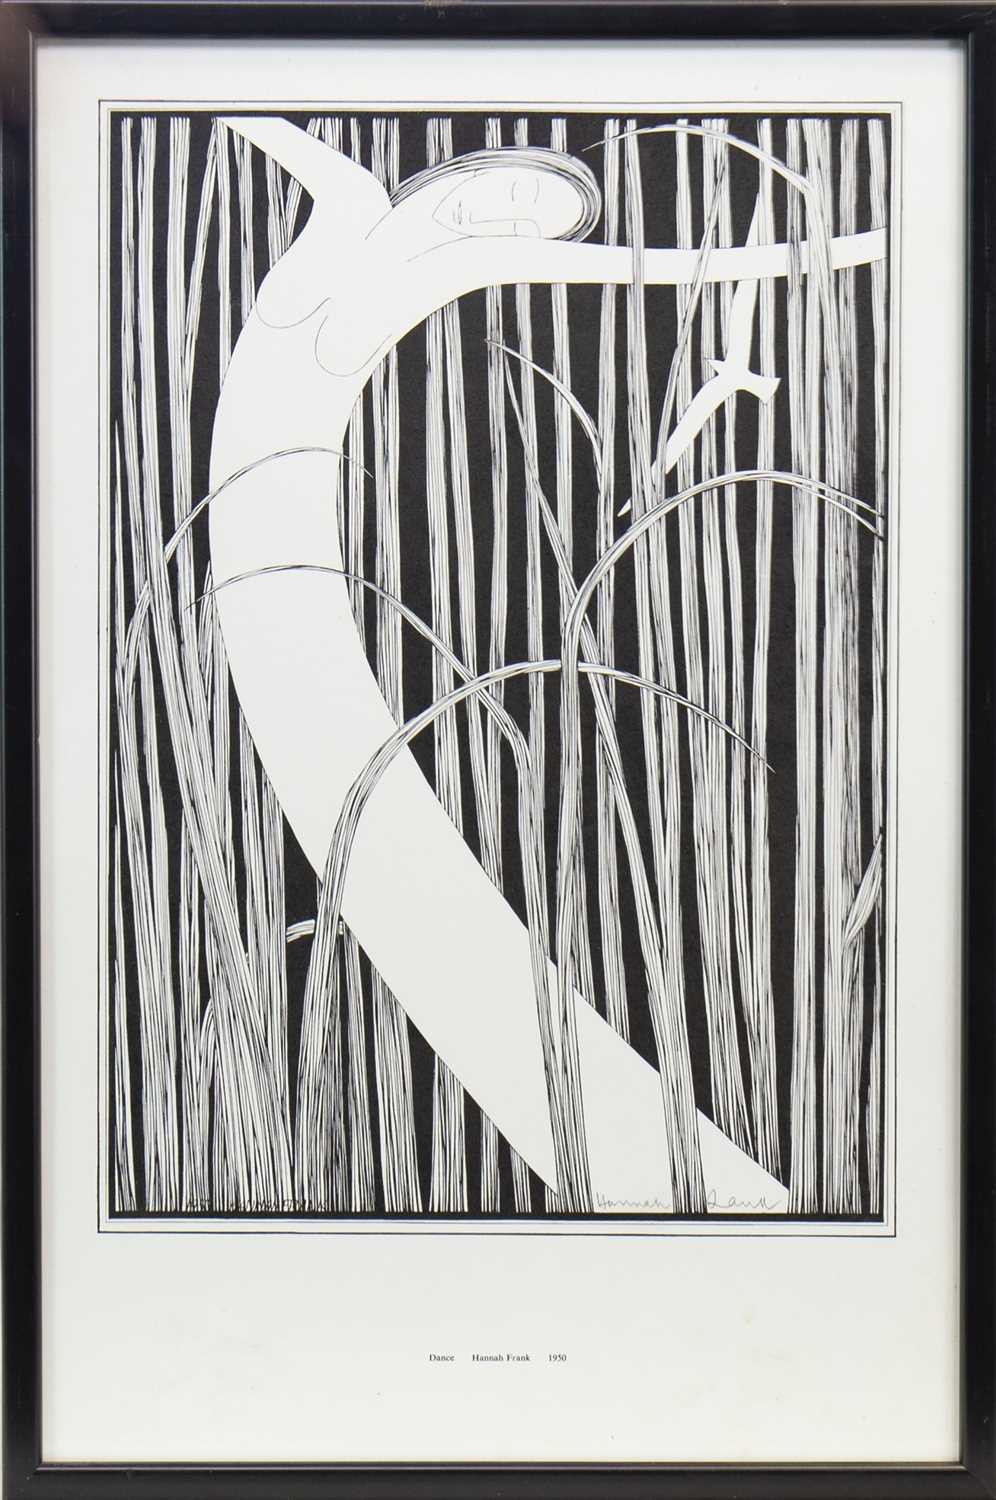 Lot 505 - DANCE, A LITHOGRAPH BY HANNAH FRANK